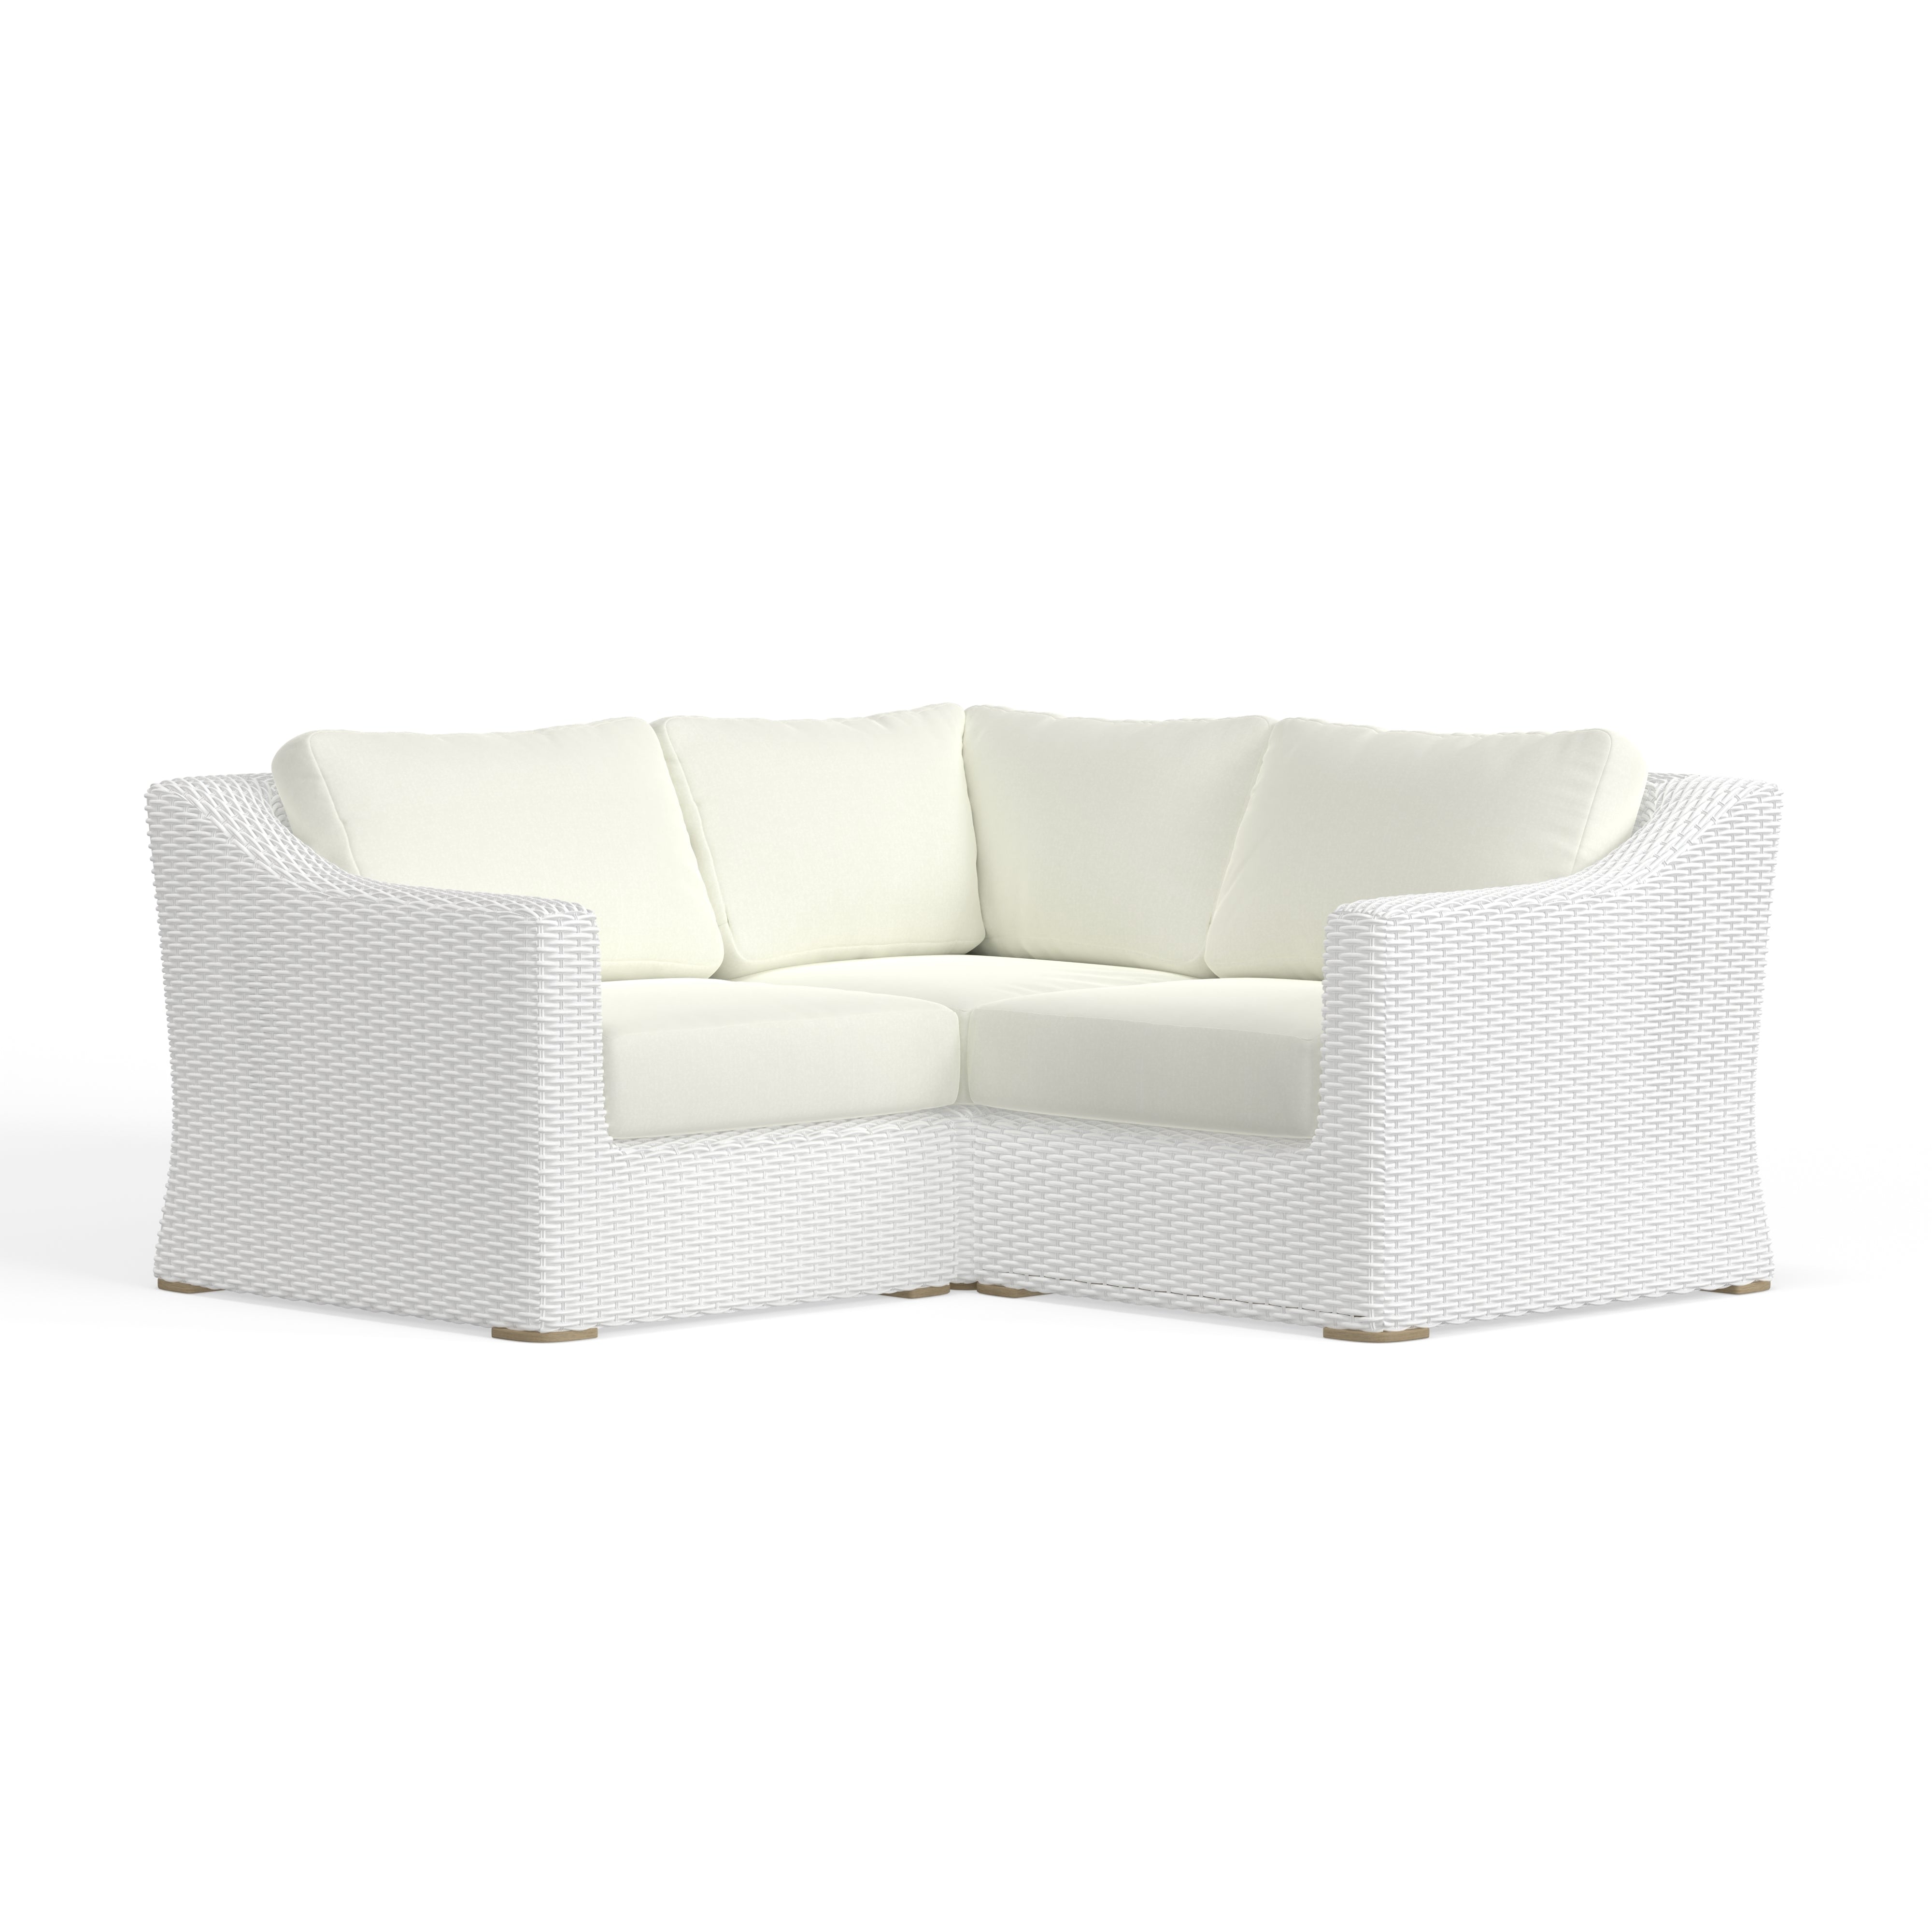 Patio Wicker Sectional